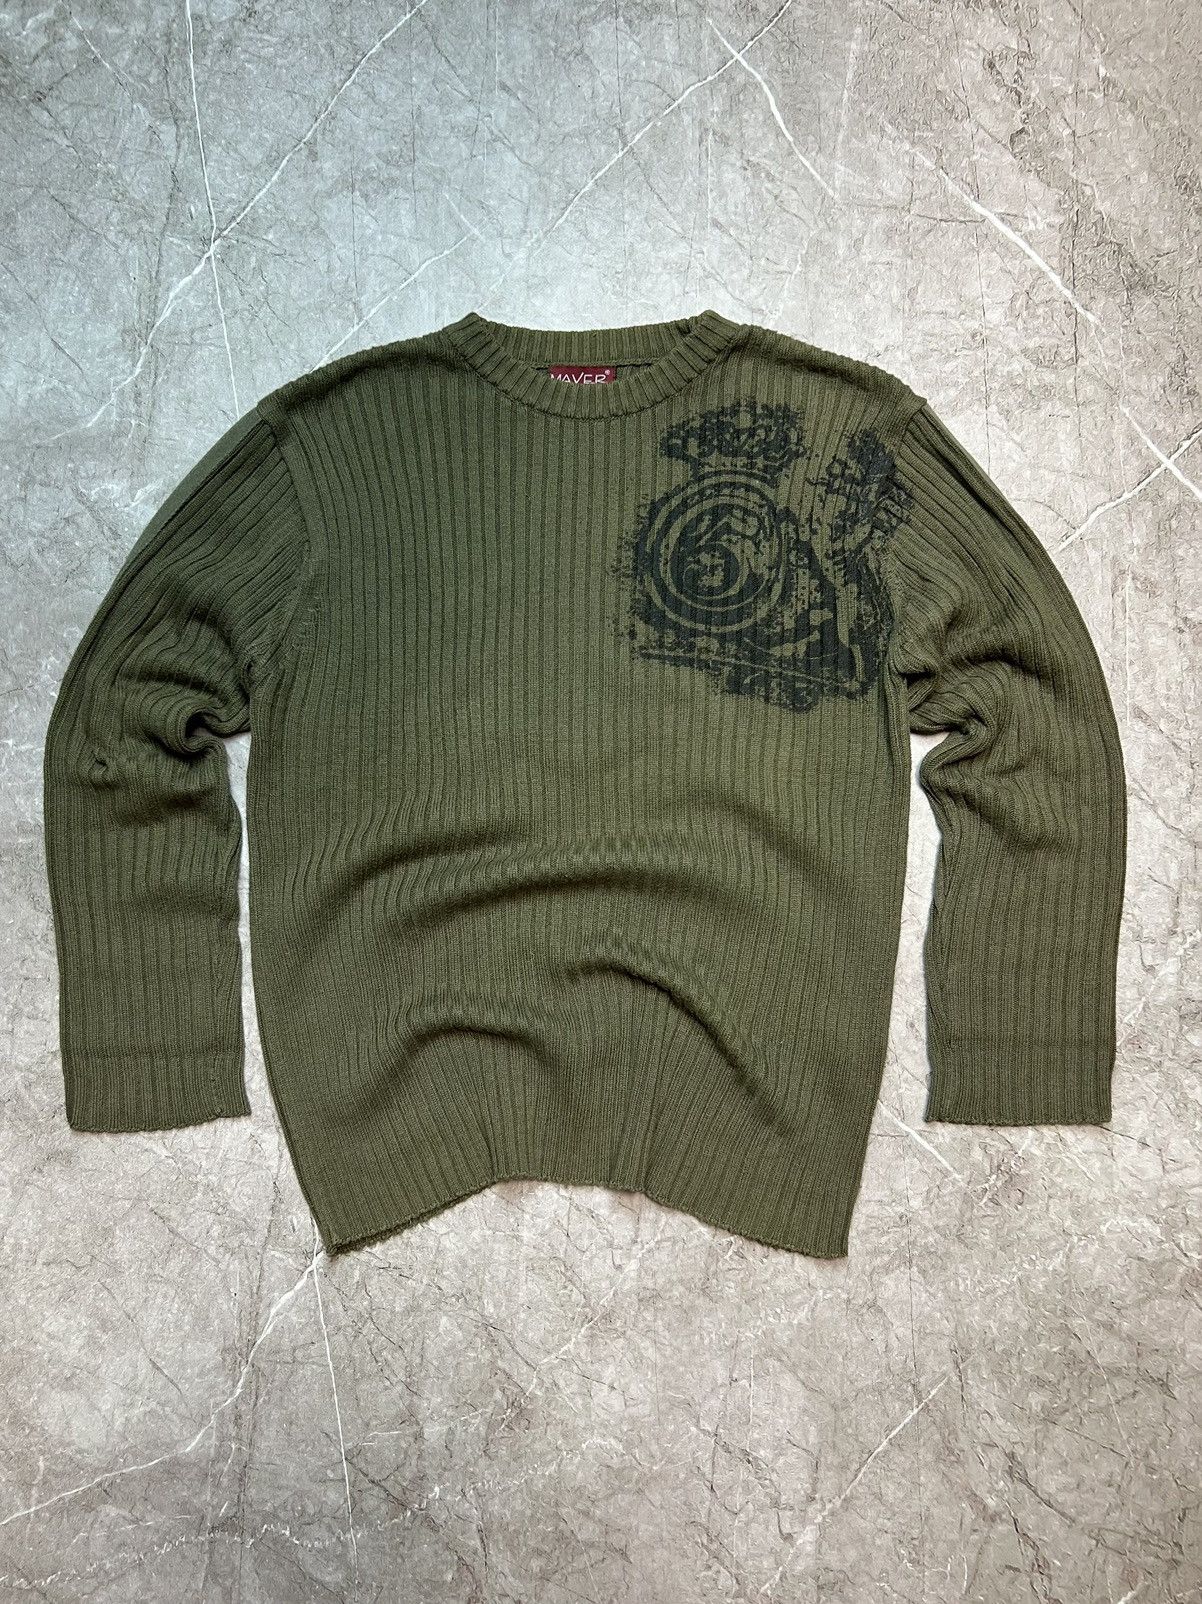 Pre-owned Archival Clothing X Avant Garde Vintage Y2k Knit Sweater Opium Vamp Style Balenciaga In Green